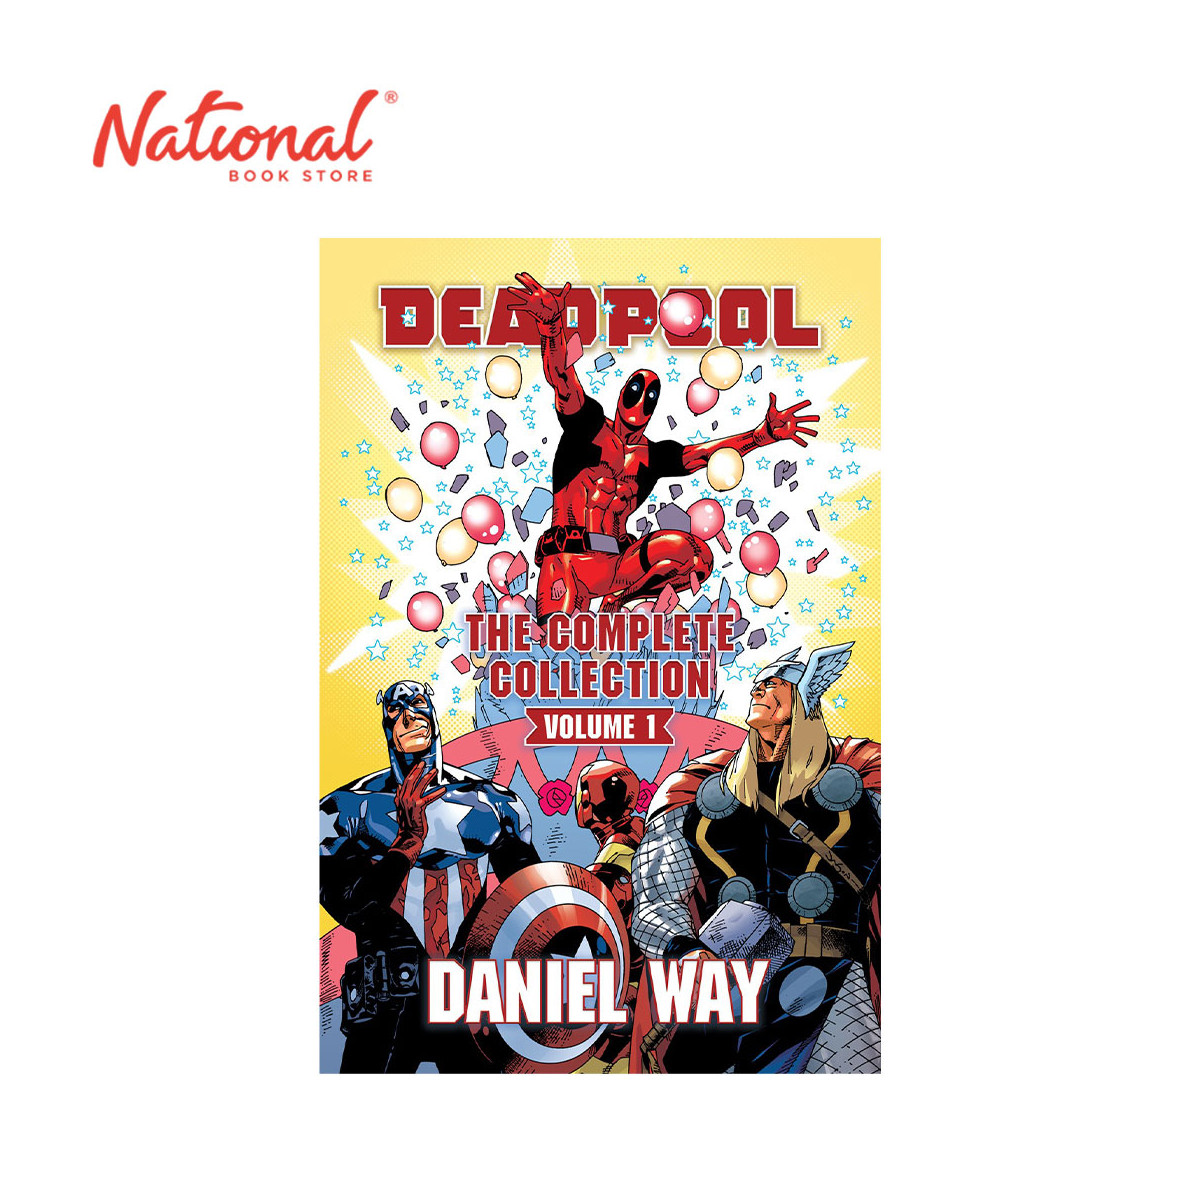 Deadpool: The Complete Collection Volume 1 by Daniel Way - Hardcover - Graphic Novels - Comics